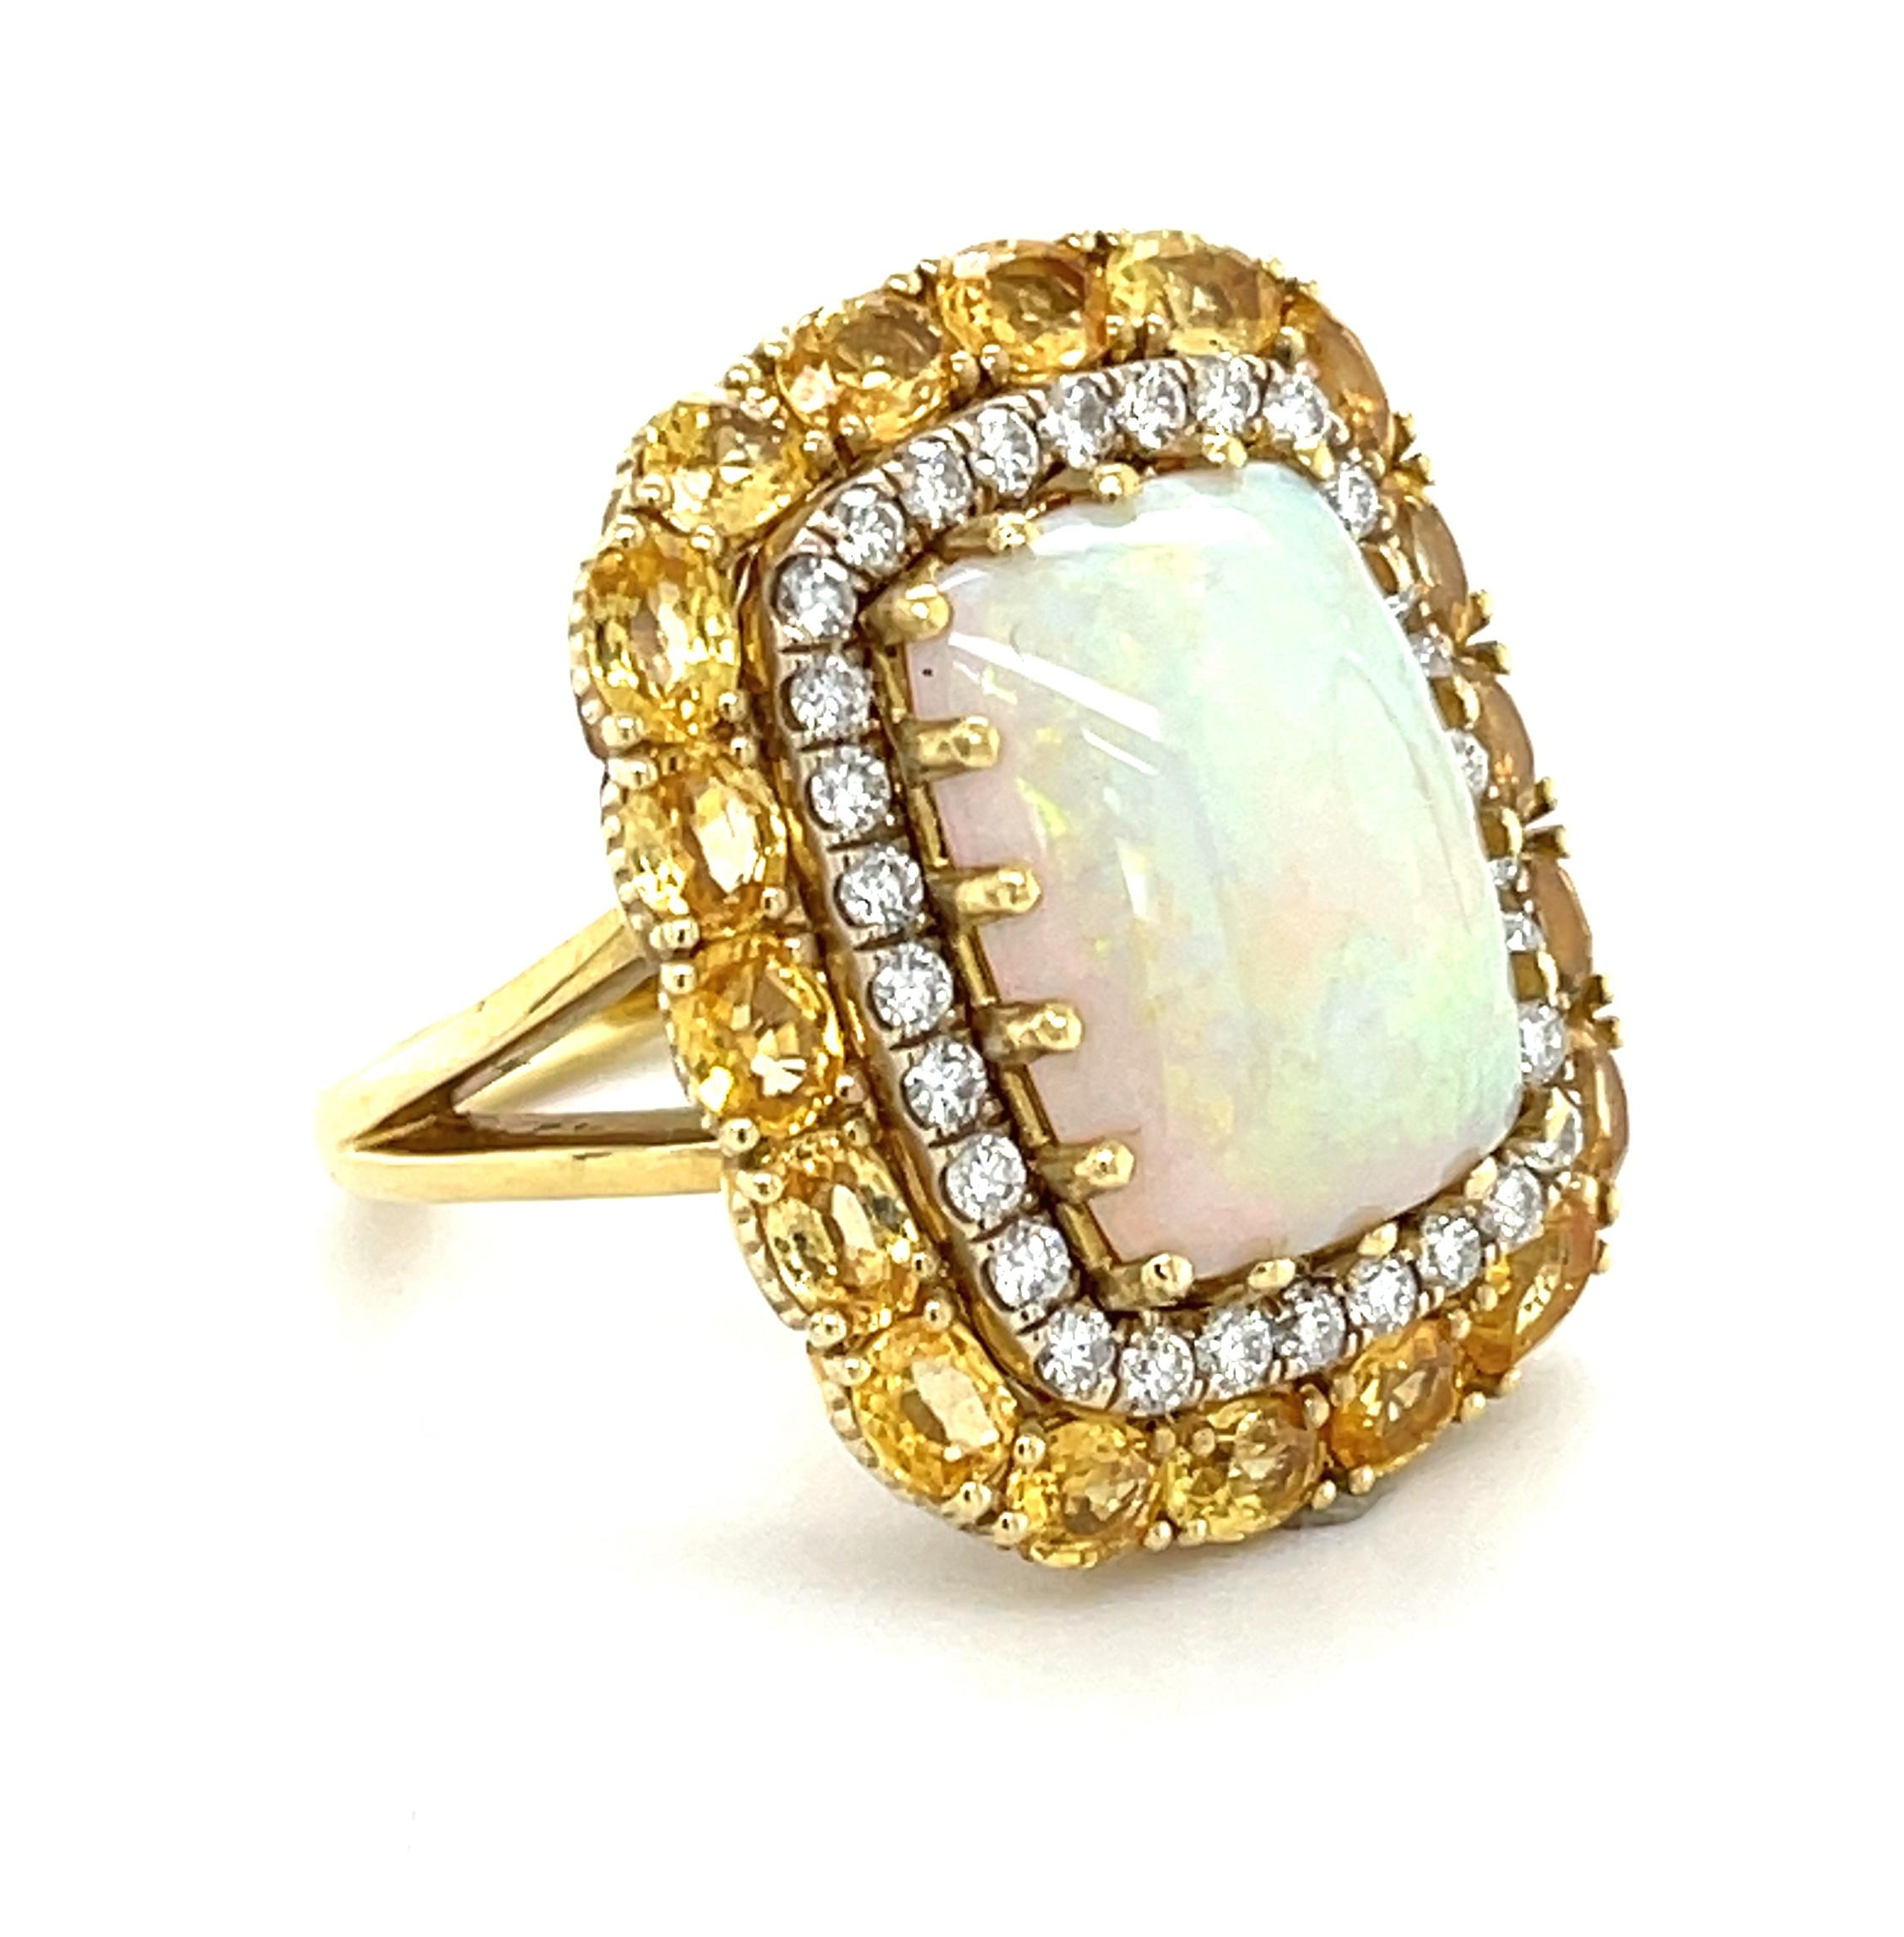 Cushion Cut 5.45 ct. Australian Opal, Yellow Sapphire and Diamond Cocktail Ring in 18k Gold For Sale